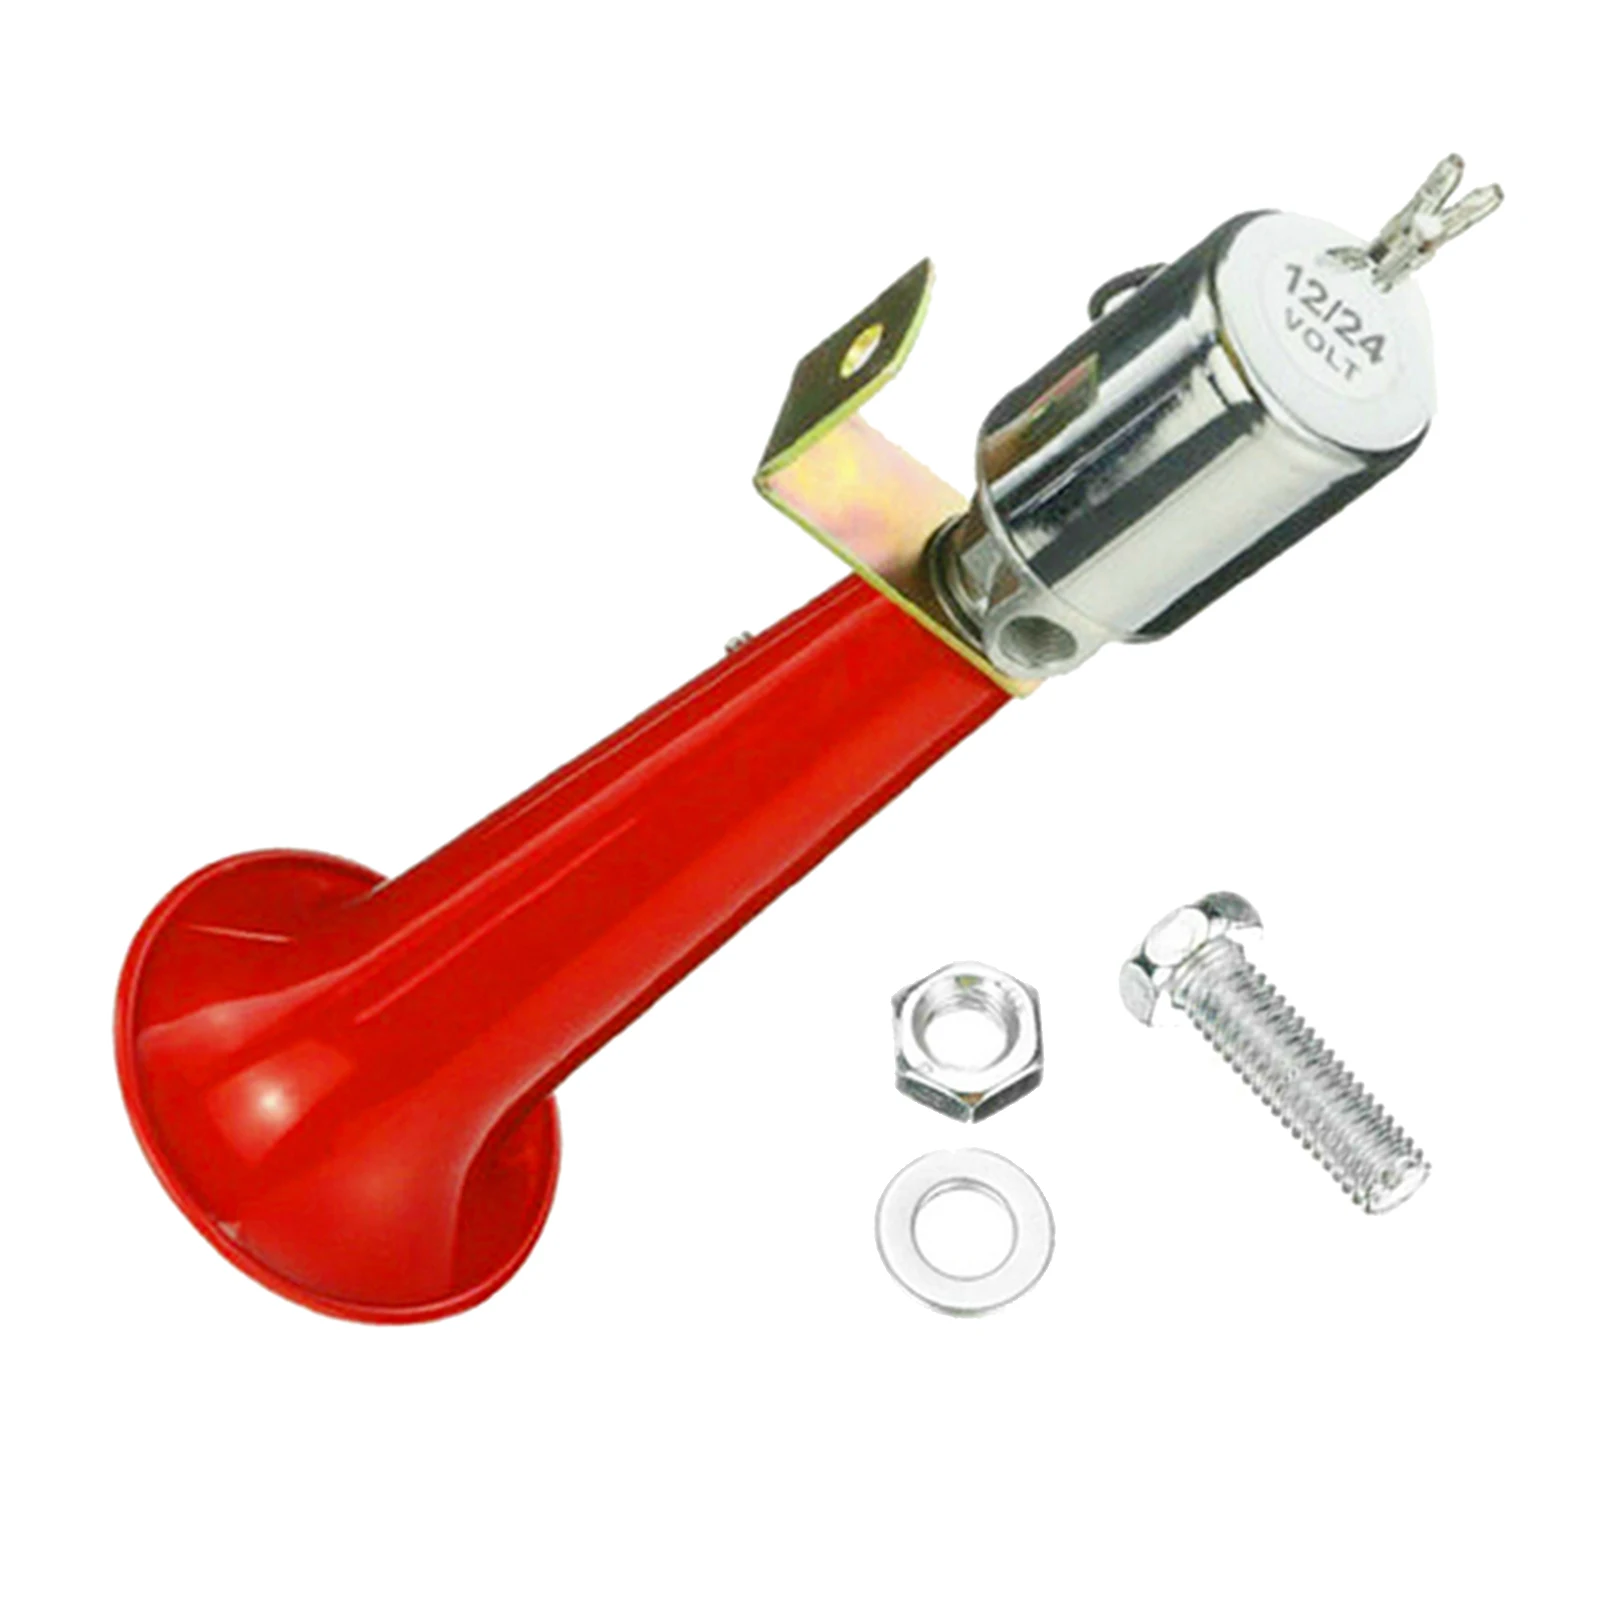 Super Loud 12/24V 180db Air Horn 10 Inches Single Trumpet Truck Air Horn for Any 12V / 24 V Vehicles Lorrys Trains Cars